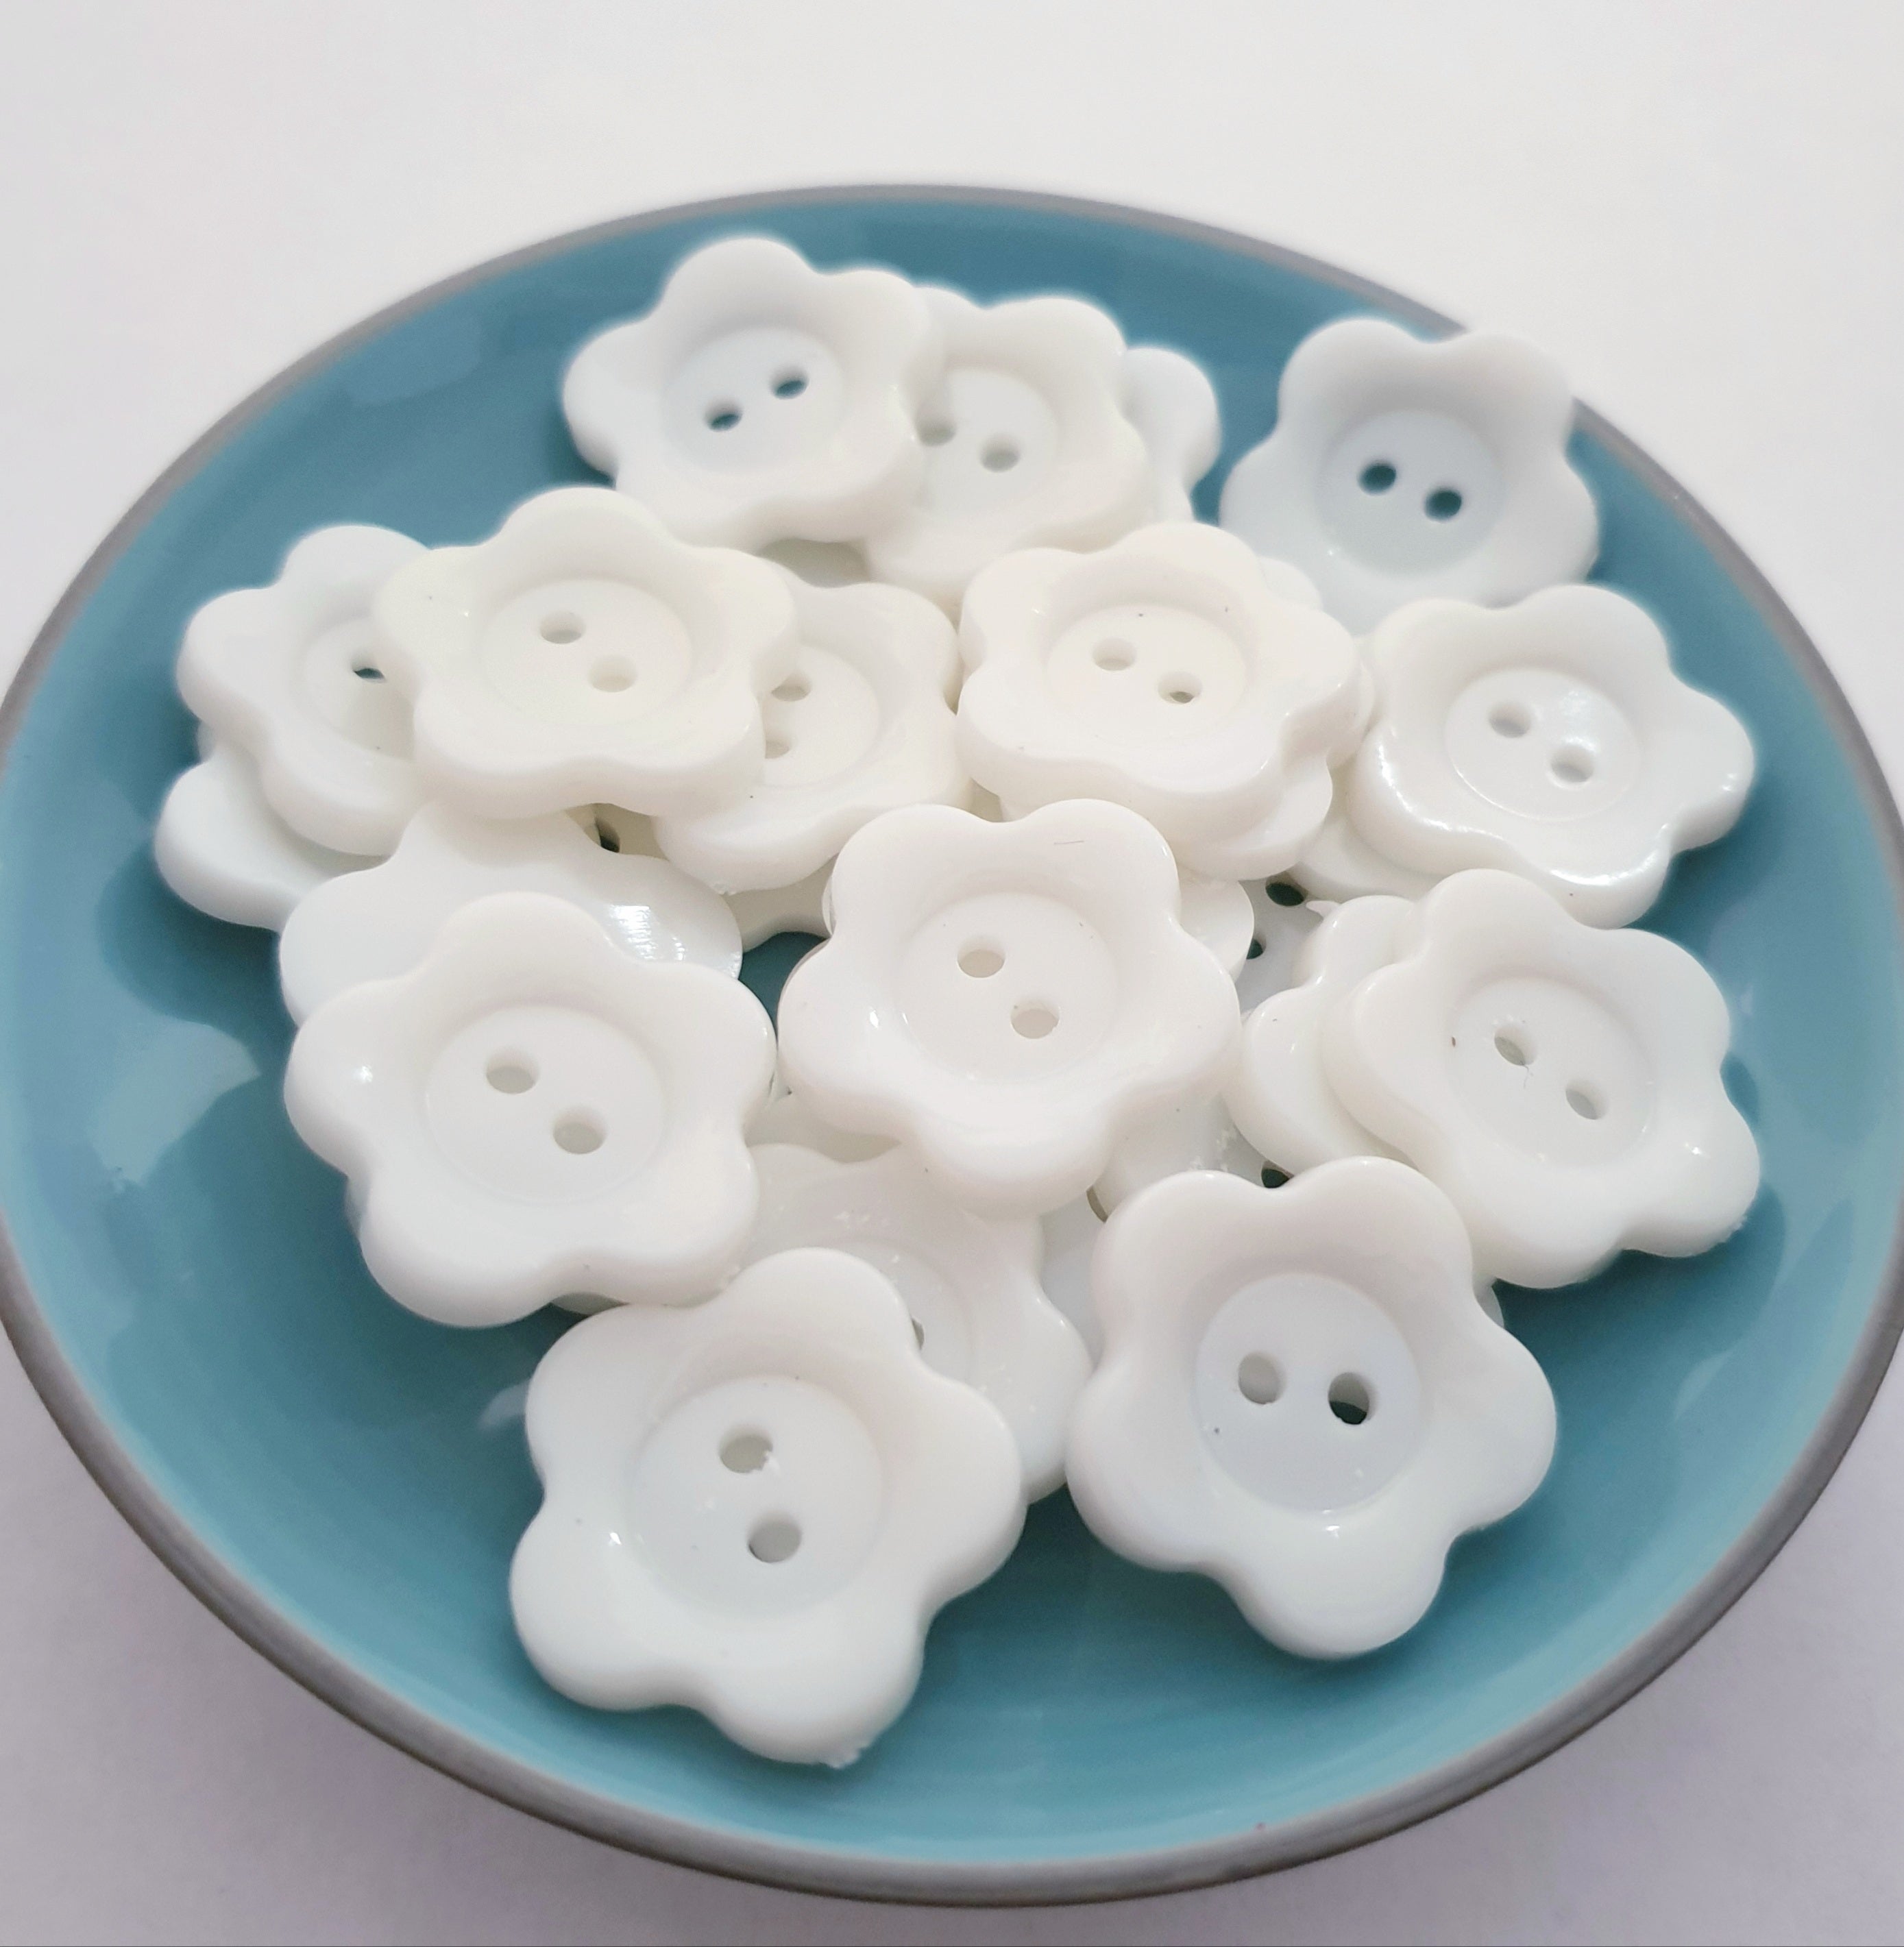 MajorCrafts 34pcs 22mm White Flower Shaped 2 Holes Resin Sew-on Buttons